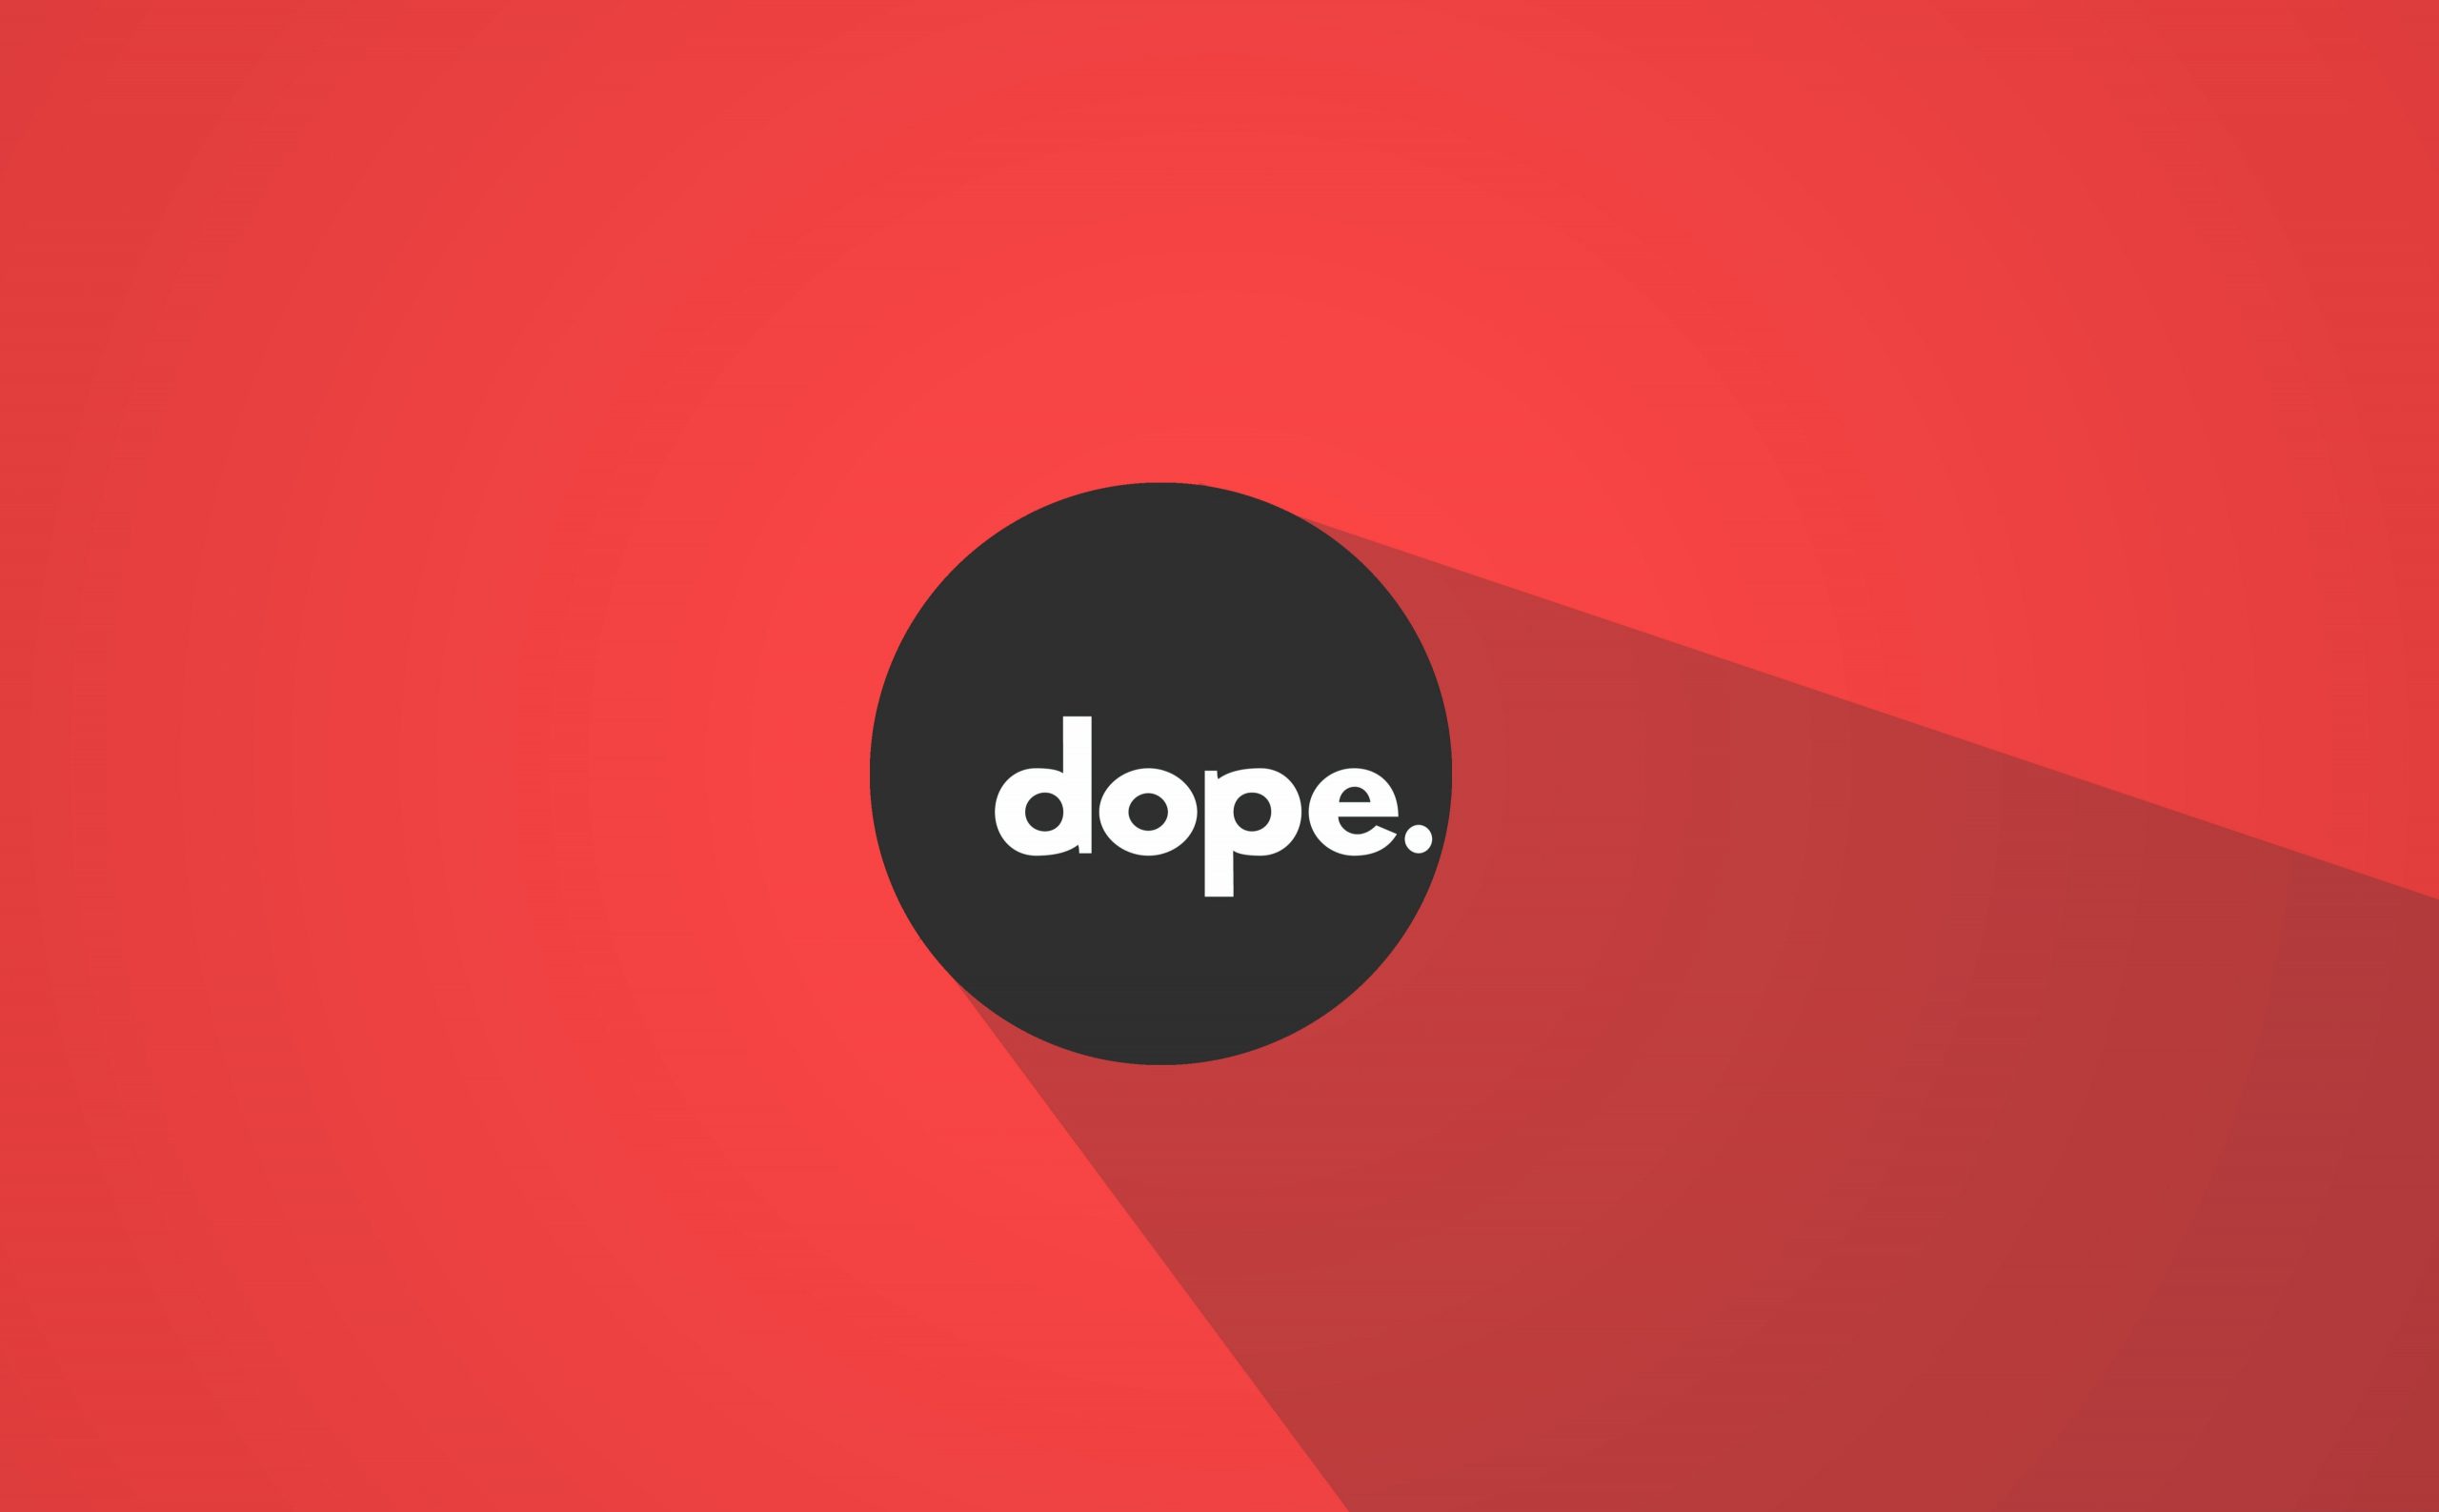 Dope. wallpaper, Artistic, Typography, design, red, communication, no peopl...